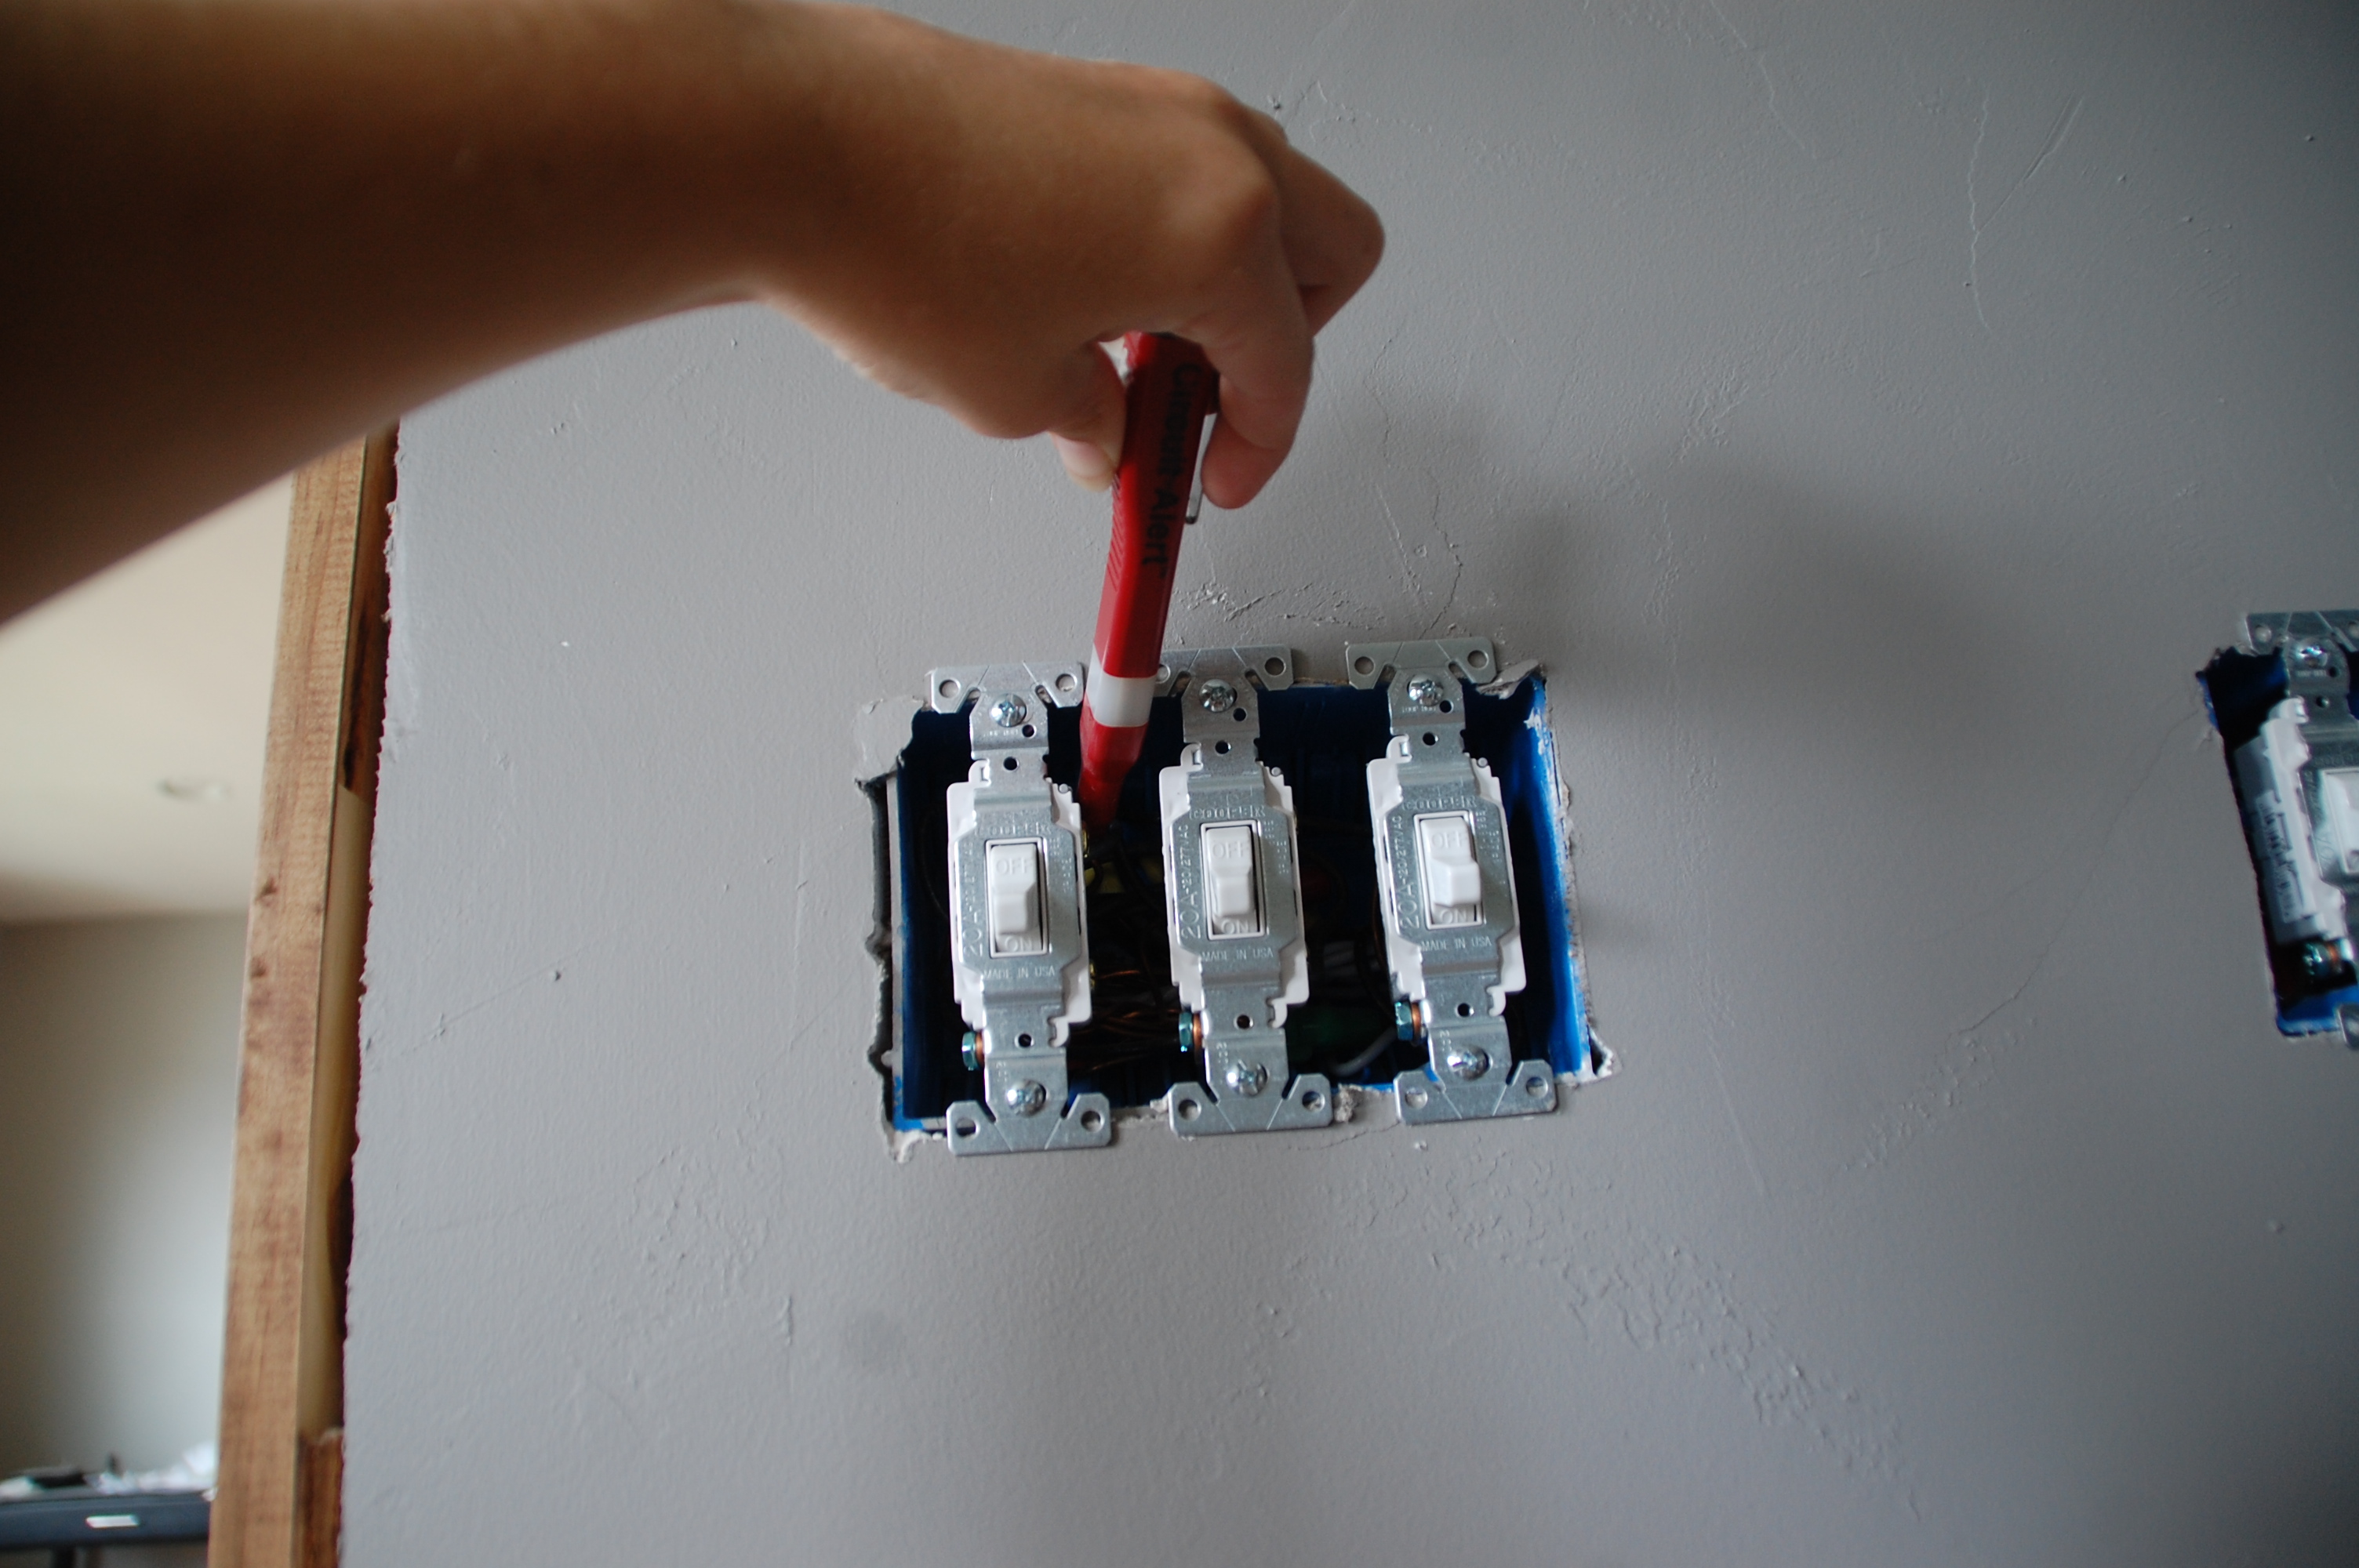 How to Install a Dimmer Switch - Voltage Detector